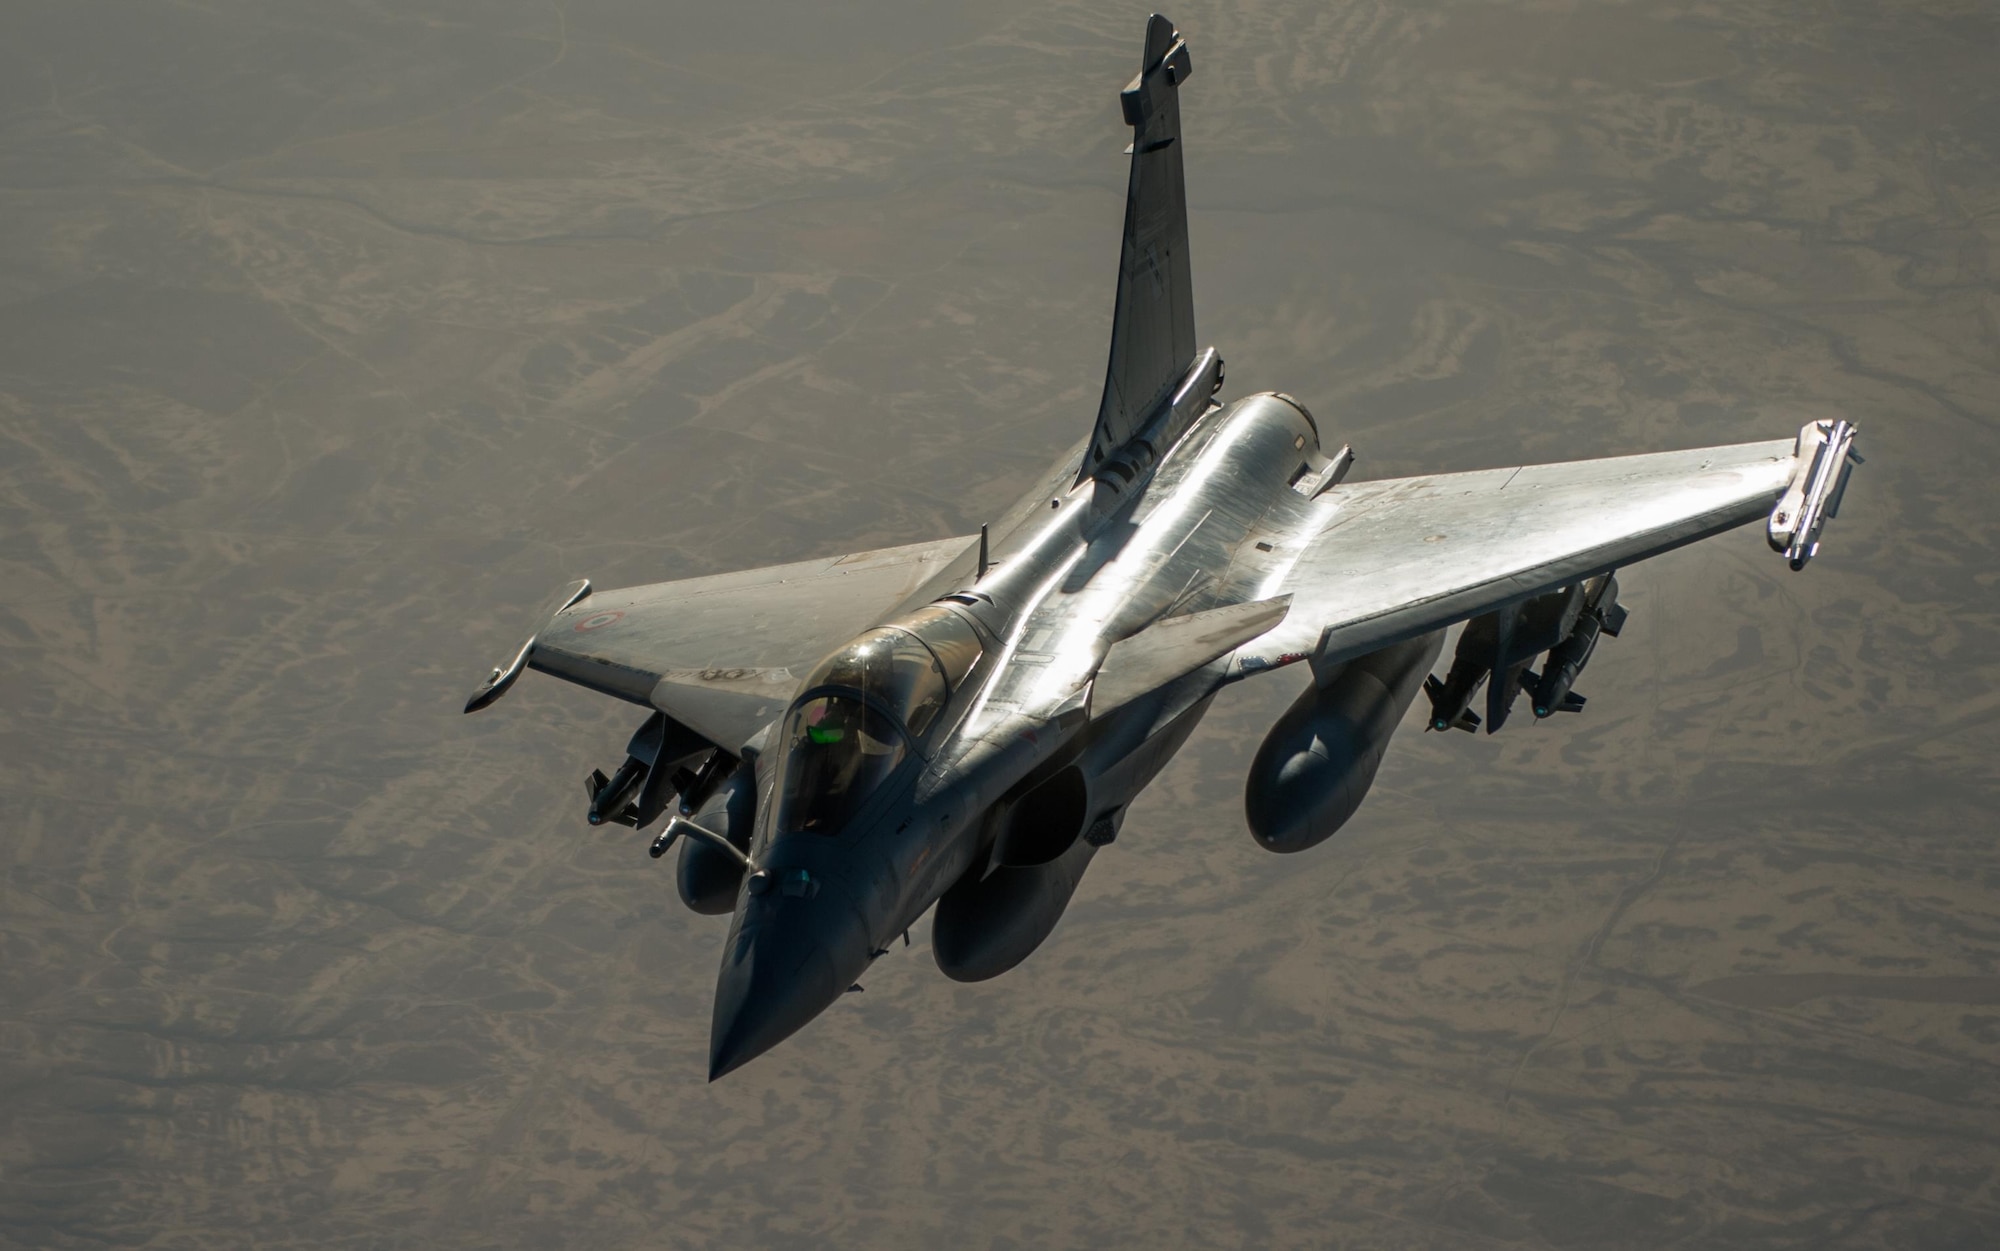 A French air force Rafale approaches a KC-135 Stratotanker over Iraq in support of Operation Inherent Resolve Oct 17, 2016. The operational mission of Operation Inherent Resolve is to militarily defeat Da'esh in the Combined Joint Operation Area in order to enable whole-of-coalition governmental actions to increase regional stability. (U.S. Air Force photo by Staff Sgt. Douglas Ellis/Released)